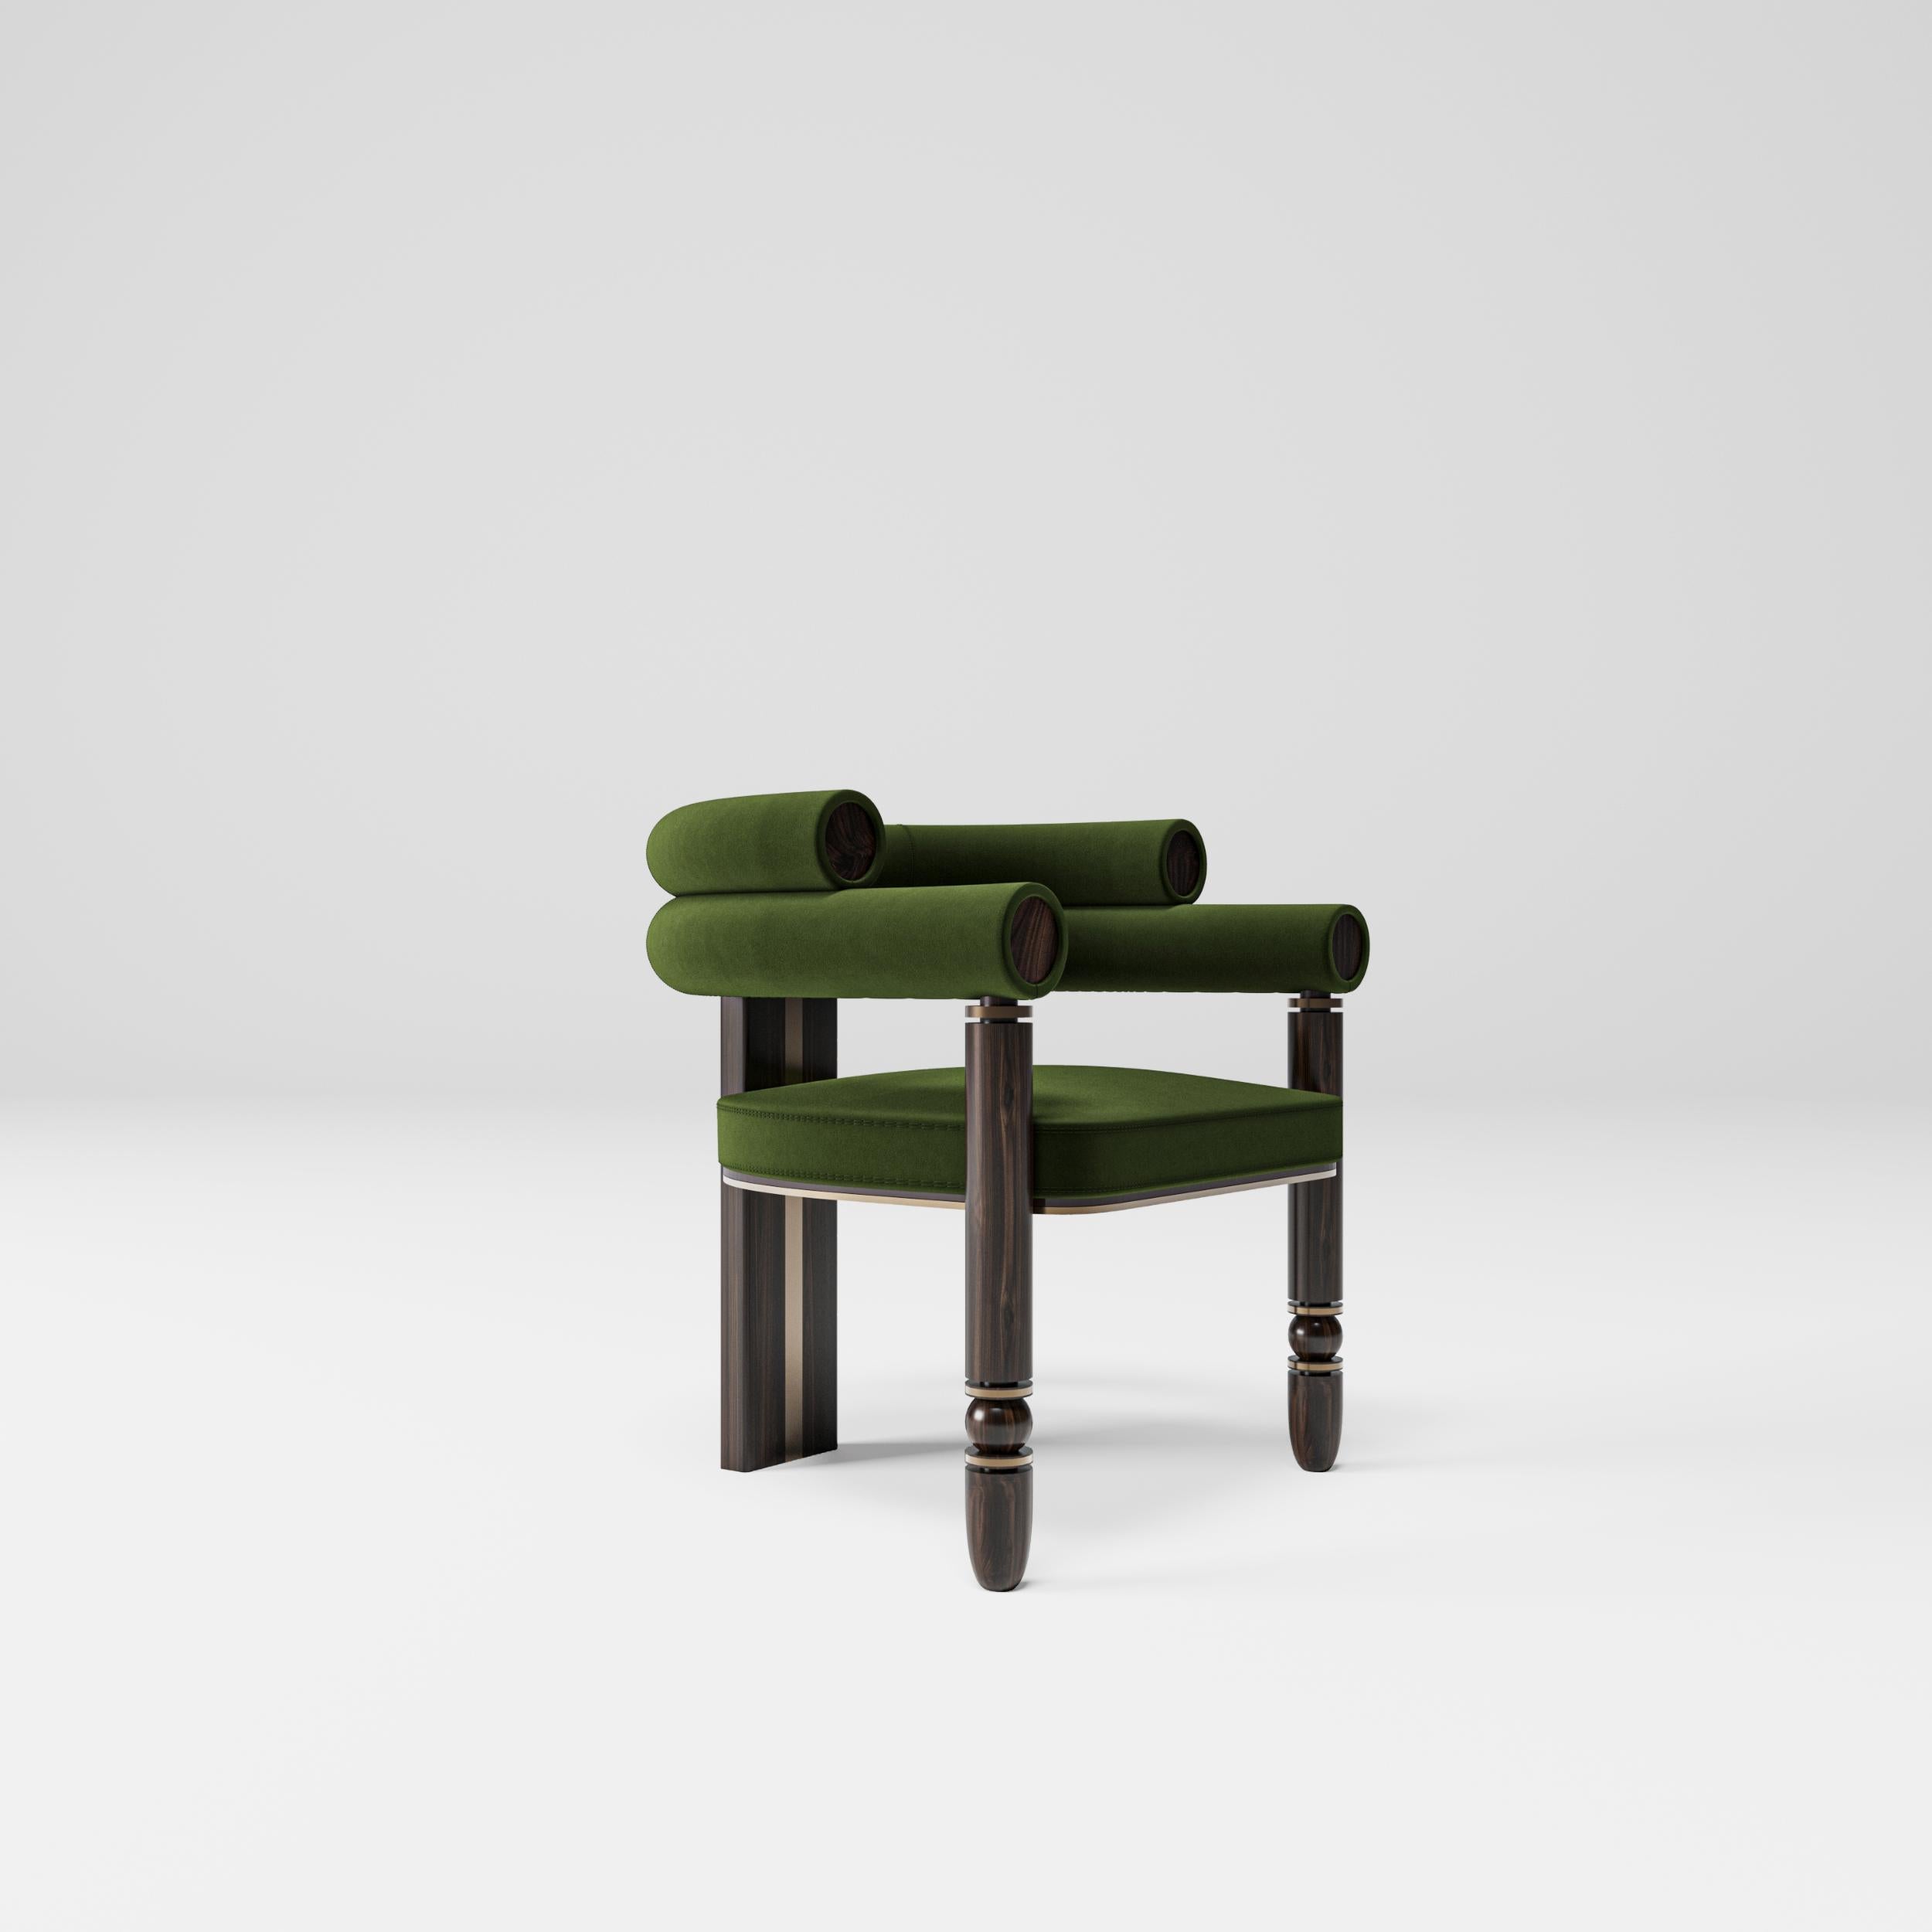 Anatolian Chair

Taking its flamboyant and sociable attitude from the color of brass, and its naive and shy attitude from chestnut wood, the Anatolian chair transforms into a Mid-Century style with its green velvet upholstery. Designer Mehmet Orel,